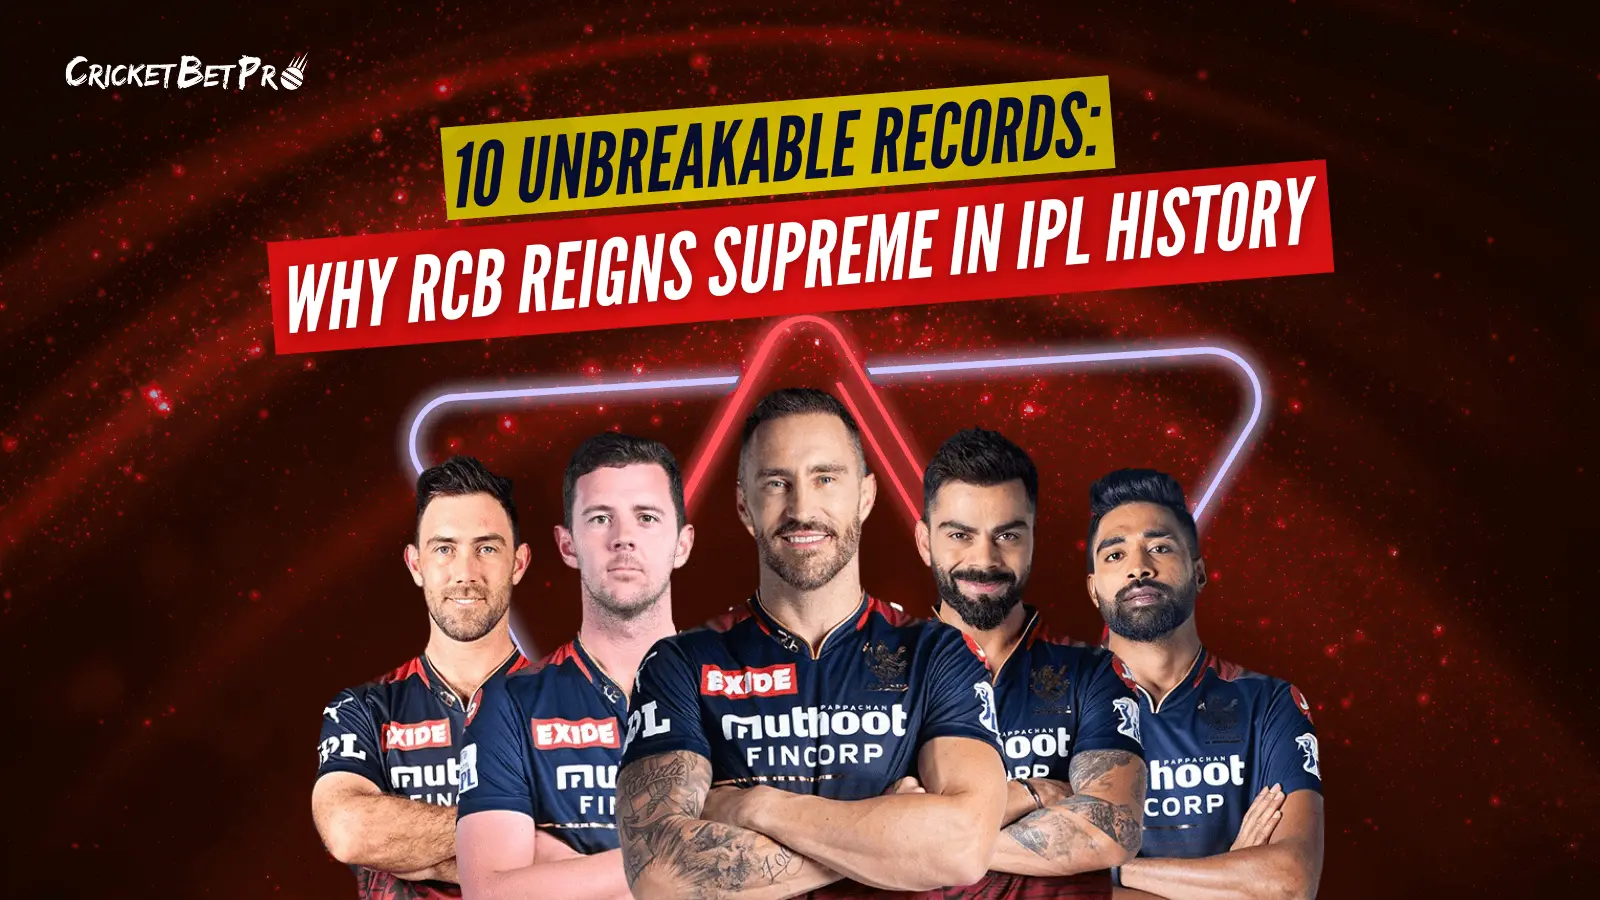 RCB's most unbreakable records